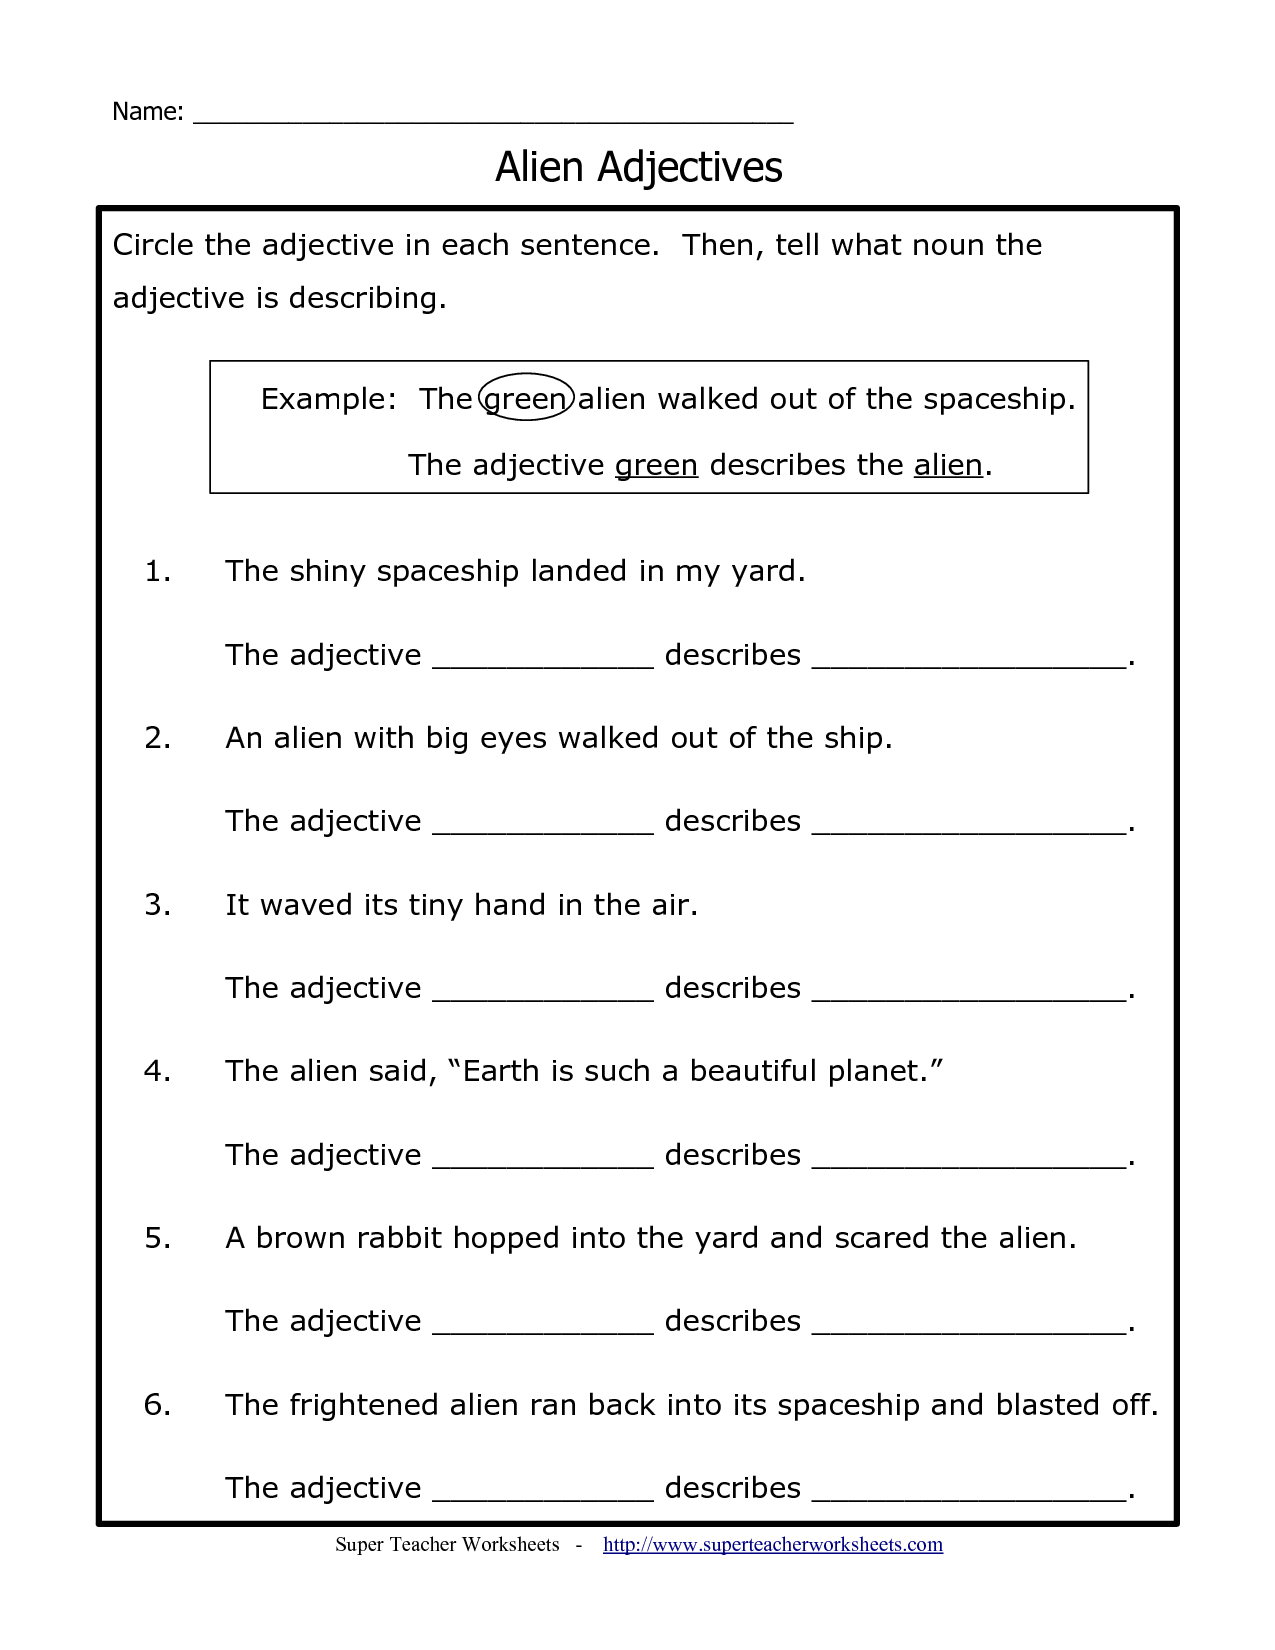 using-adjectives-and-adverbs-worksheet